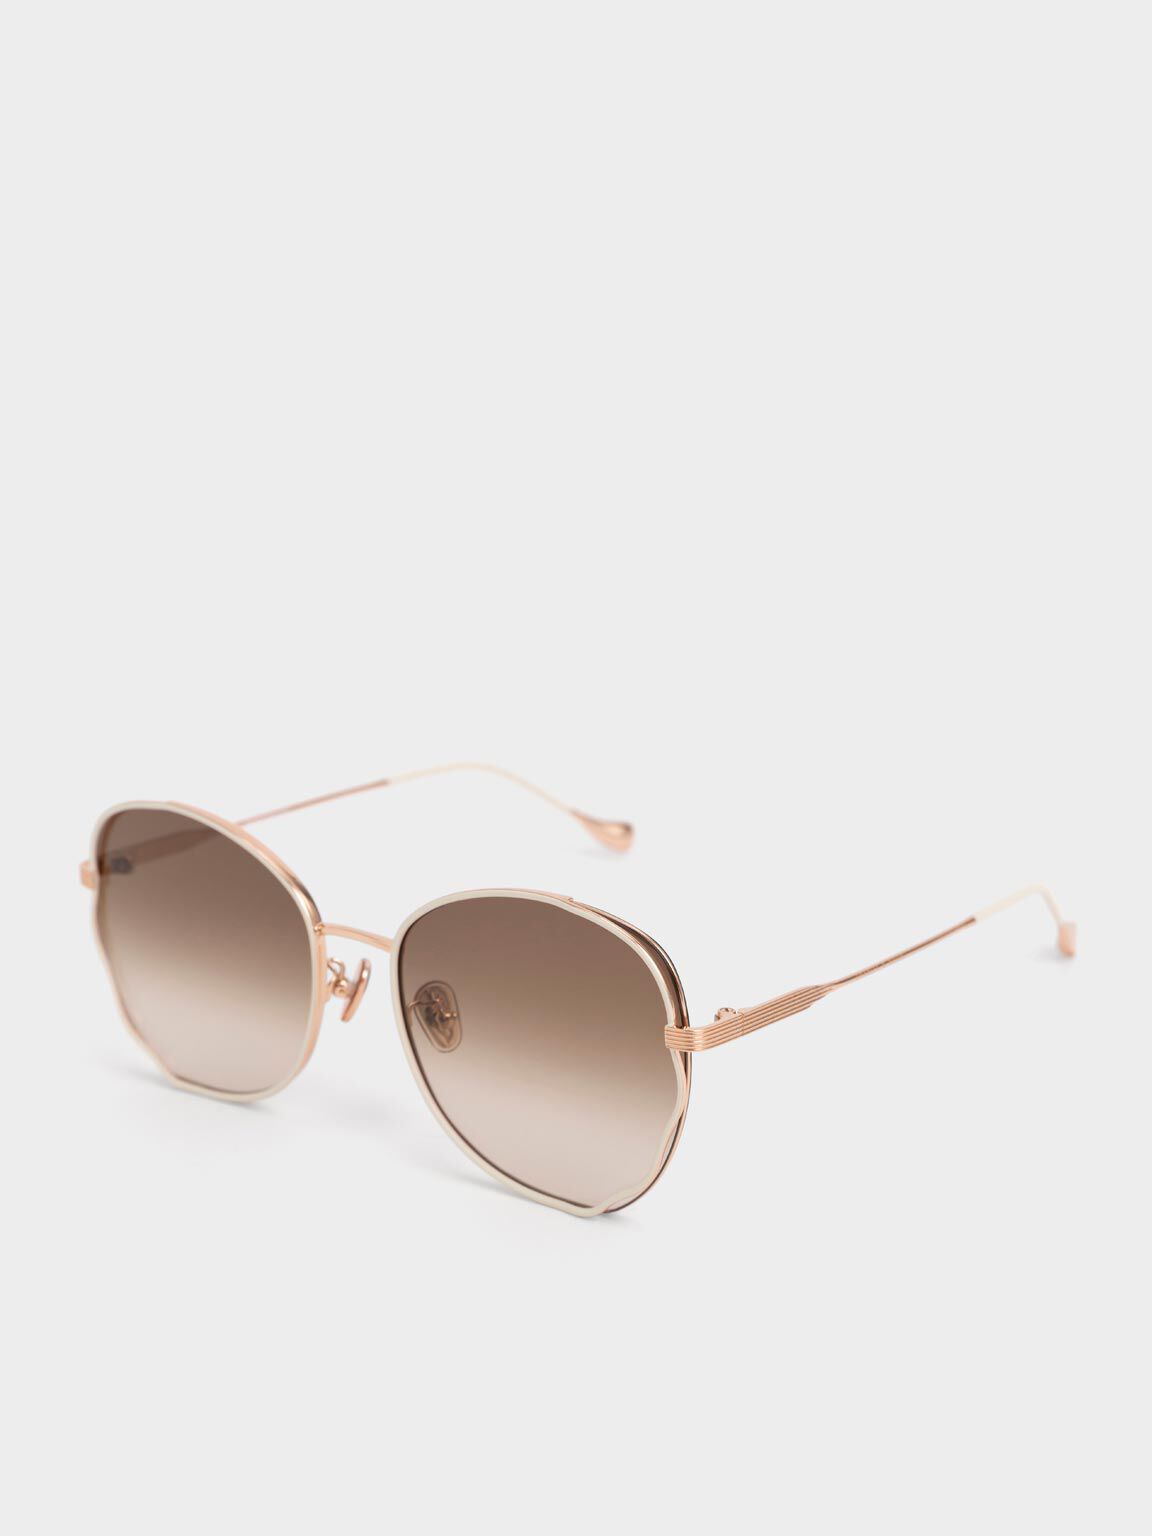 Wavy Frame Butterfly Sunglasses, Cream, hi-res